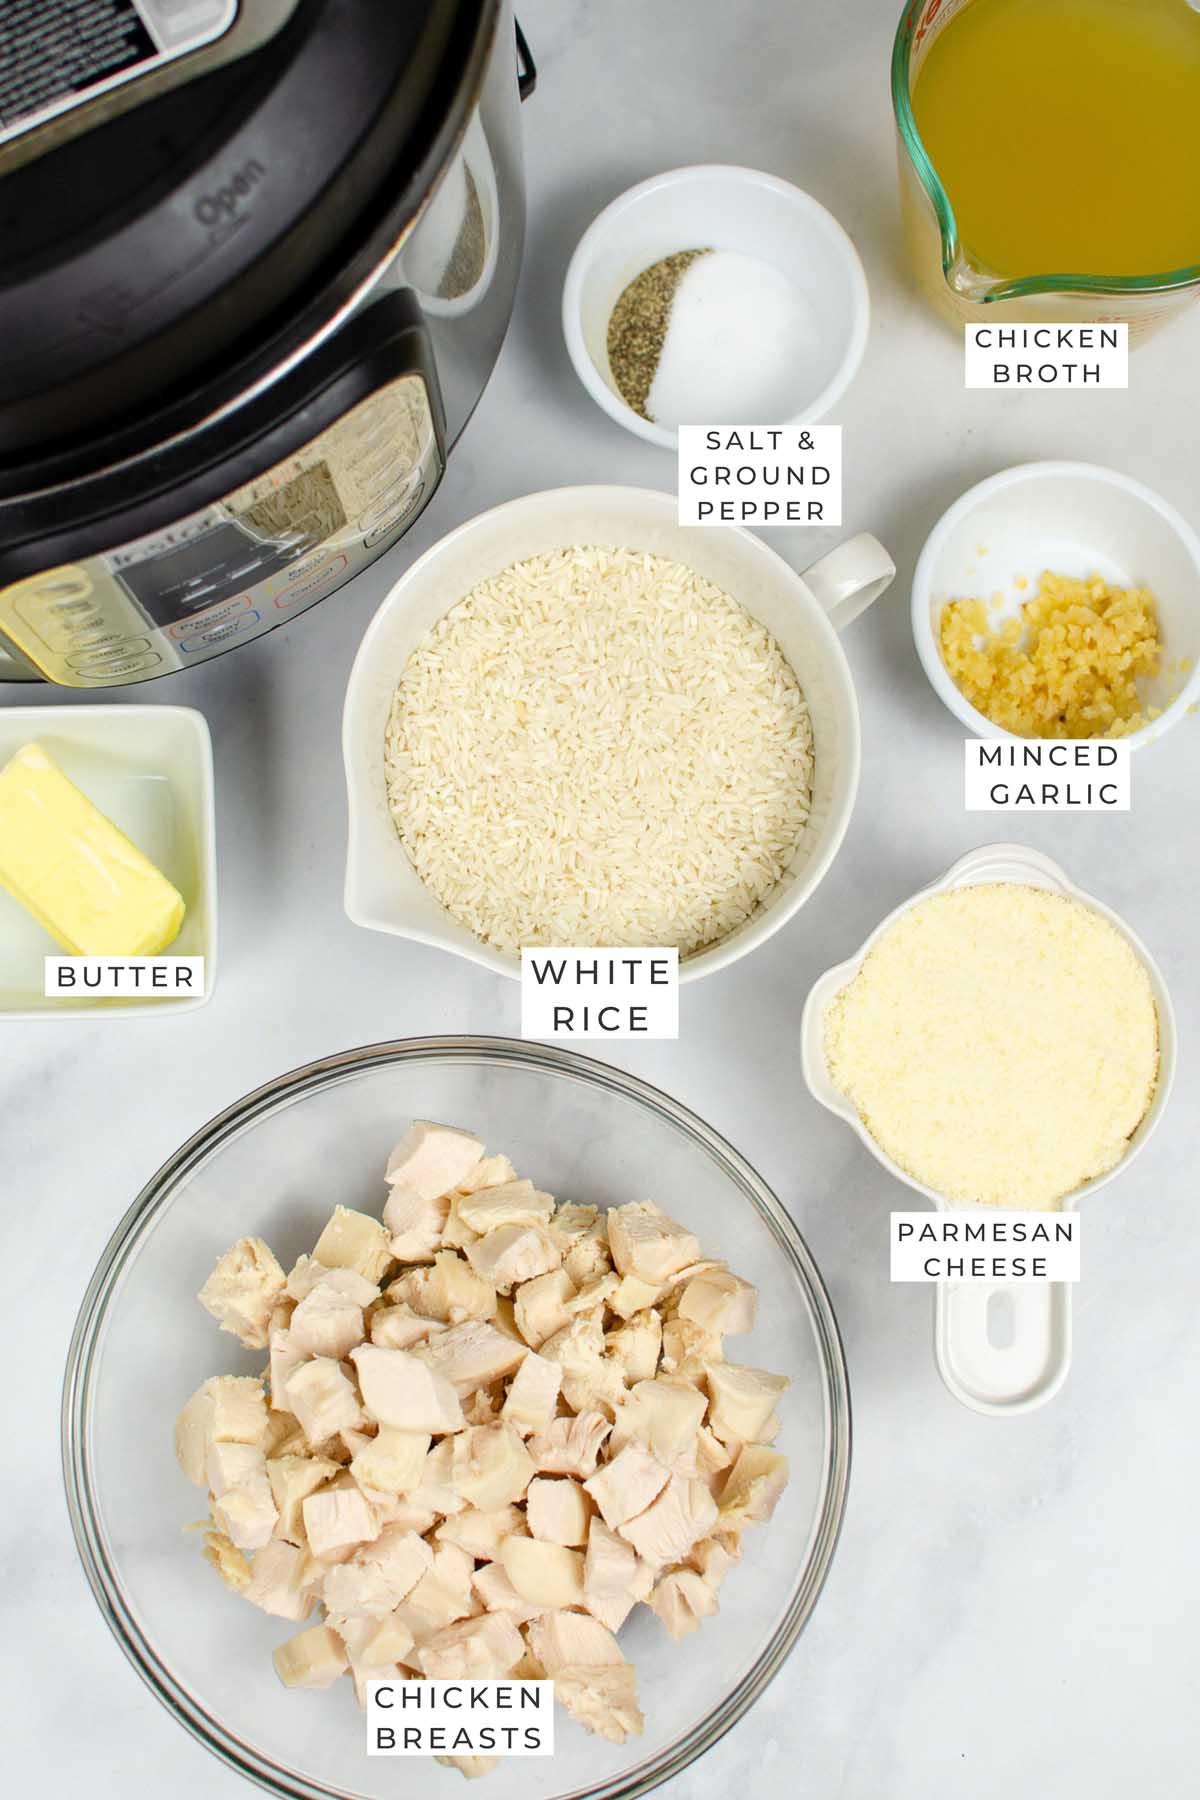 Labeled ingredients for the chicken and rice.